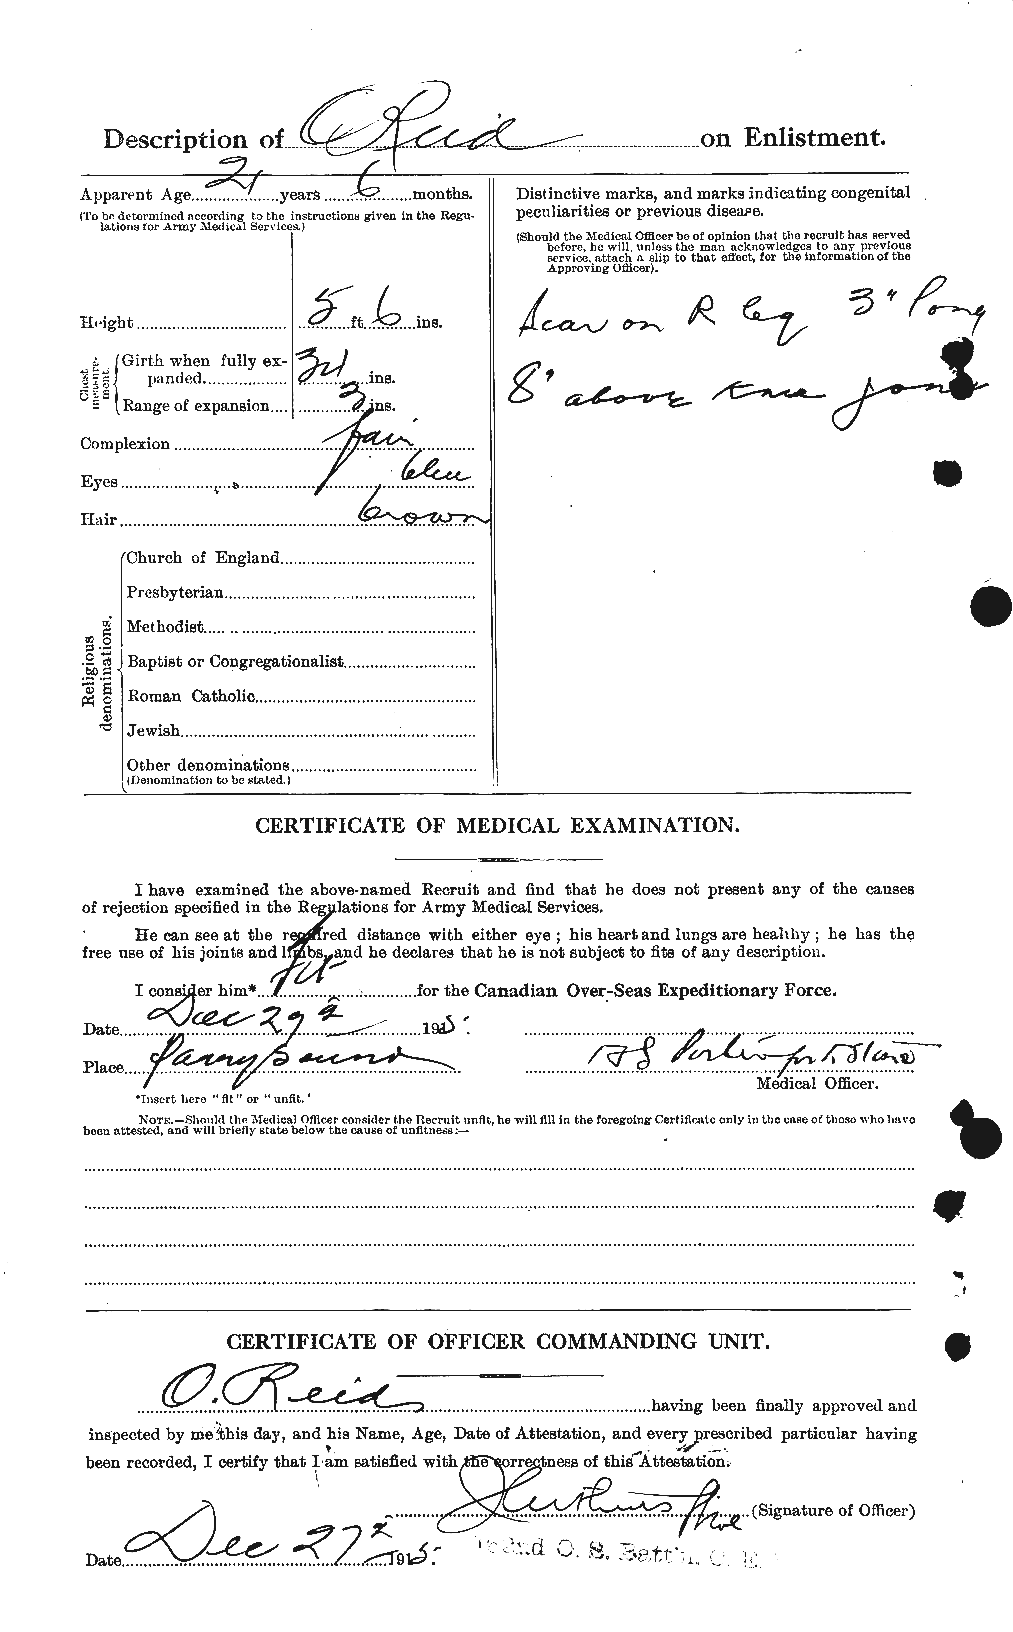 Personnel Records of the First World War - CEF 601819b